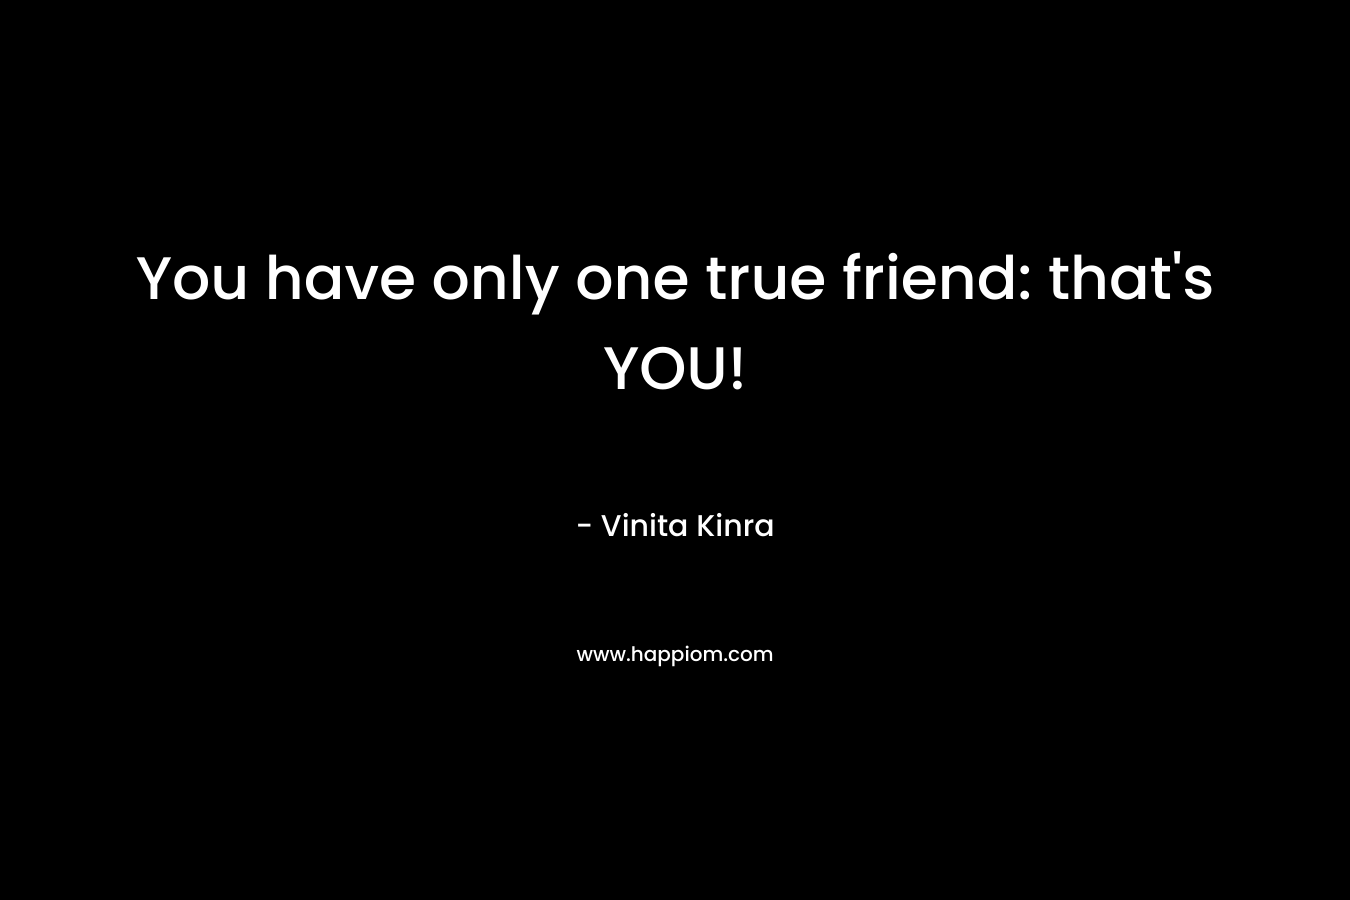 You have only one true friend: that's YOU!